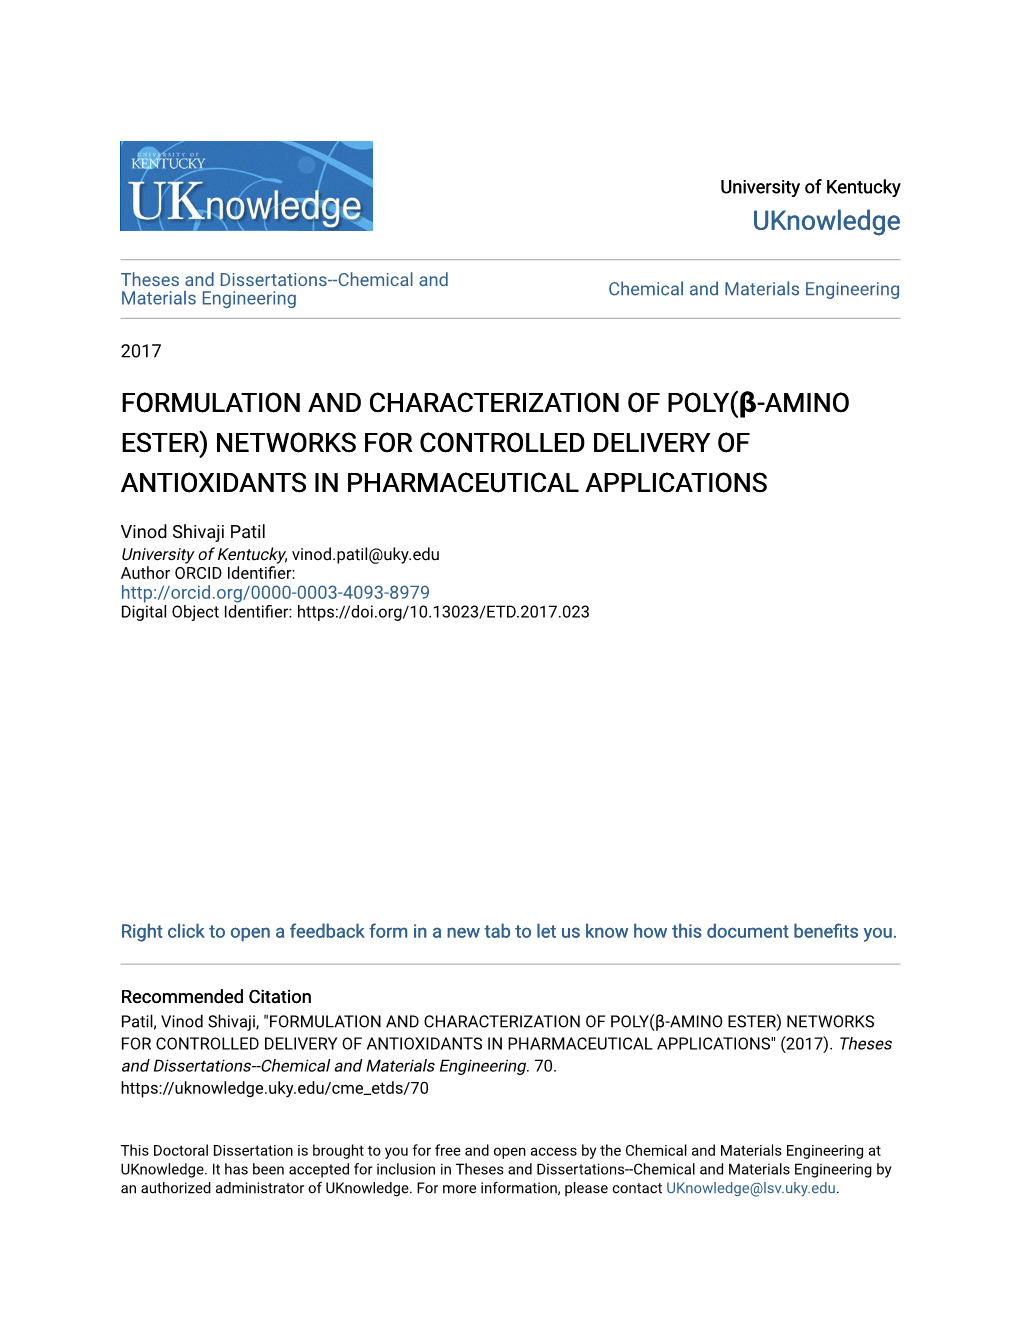 Formulation and Characterization of Poly (Β